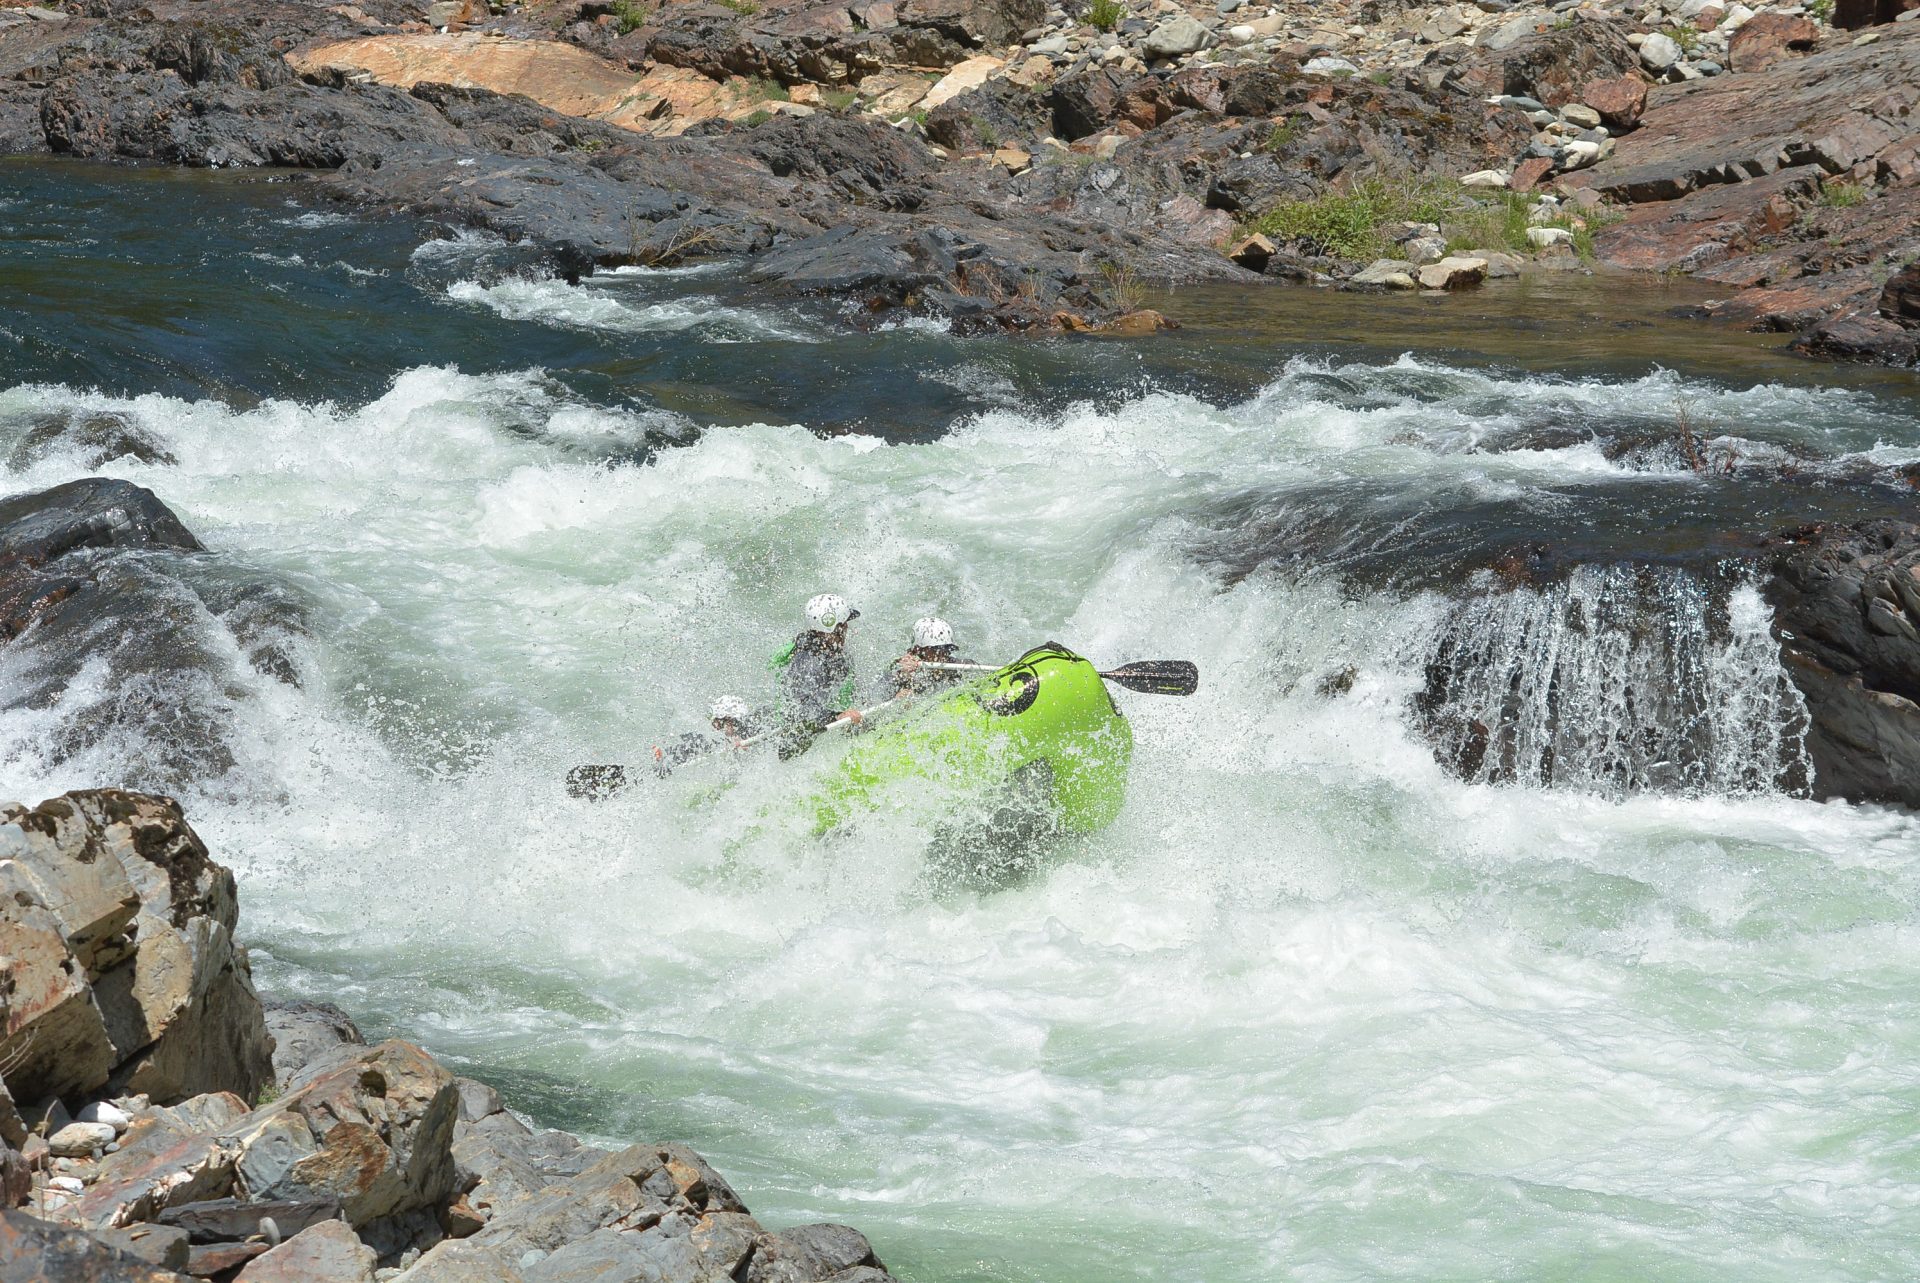 The North Yuba River. Photo Credit: Tributary Whitewater